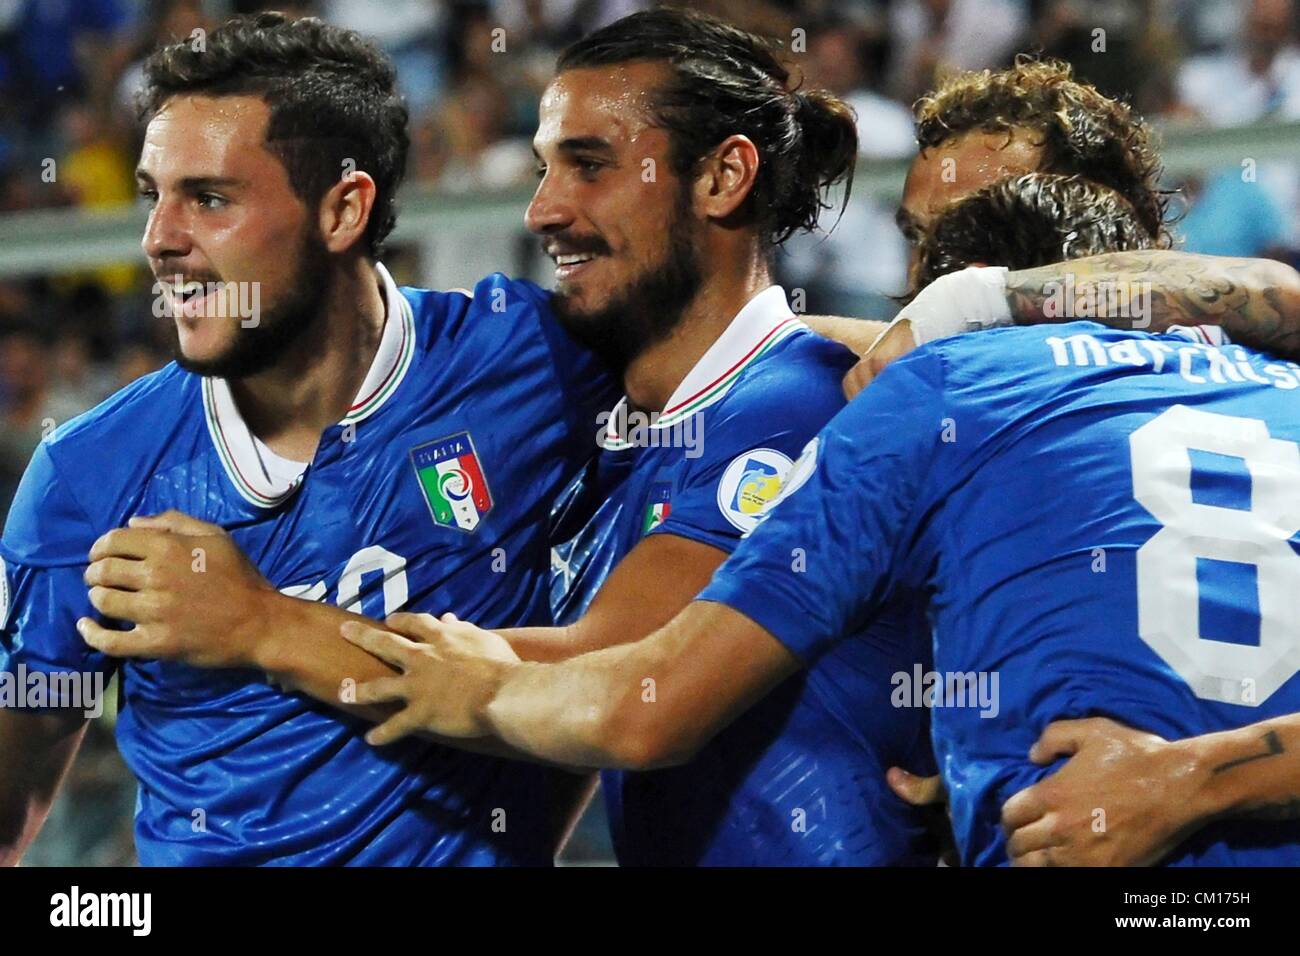 11.09.2012. Modena, Italy.   Celebrations After the goal from Mattia Destro Italy with Pablo Osvaldo  World Cup 2014 qualification match, Italy versus Malta, Modena, Italy.  Italy won with a disappointing 2-0 win. Stock Photo